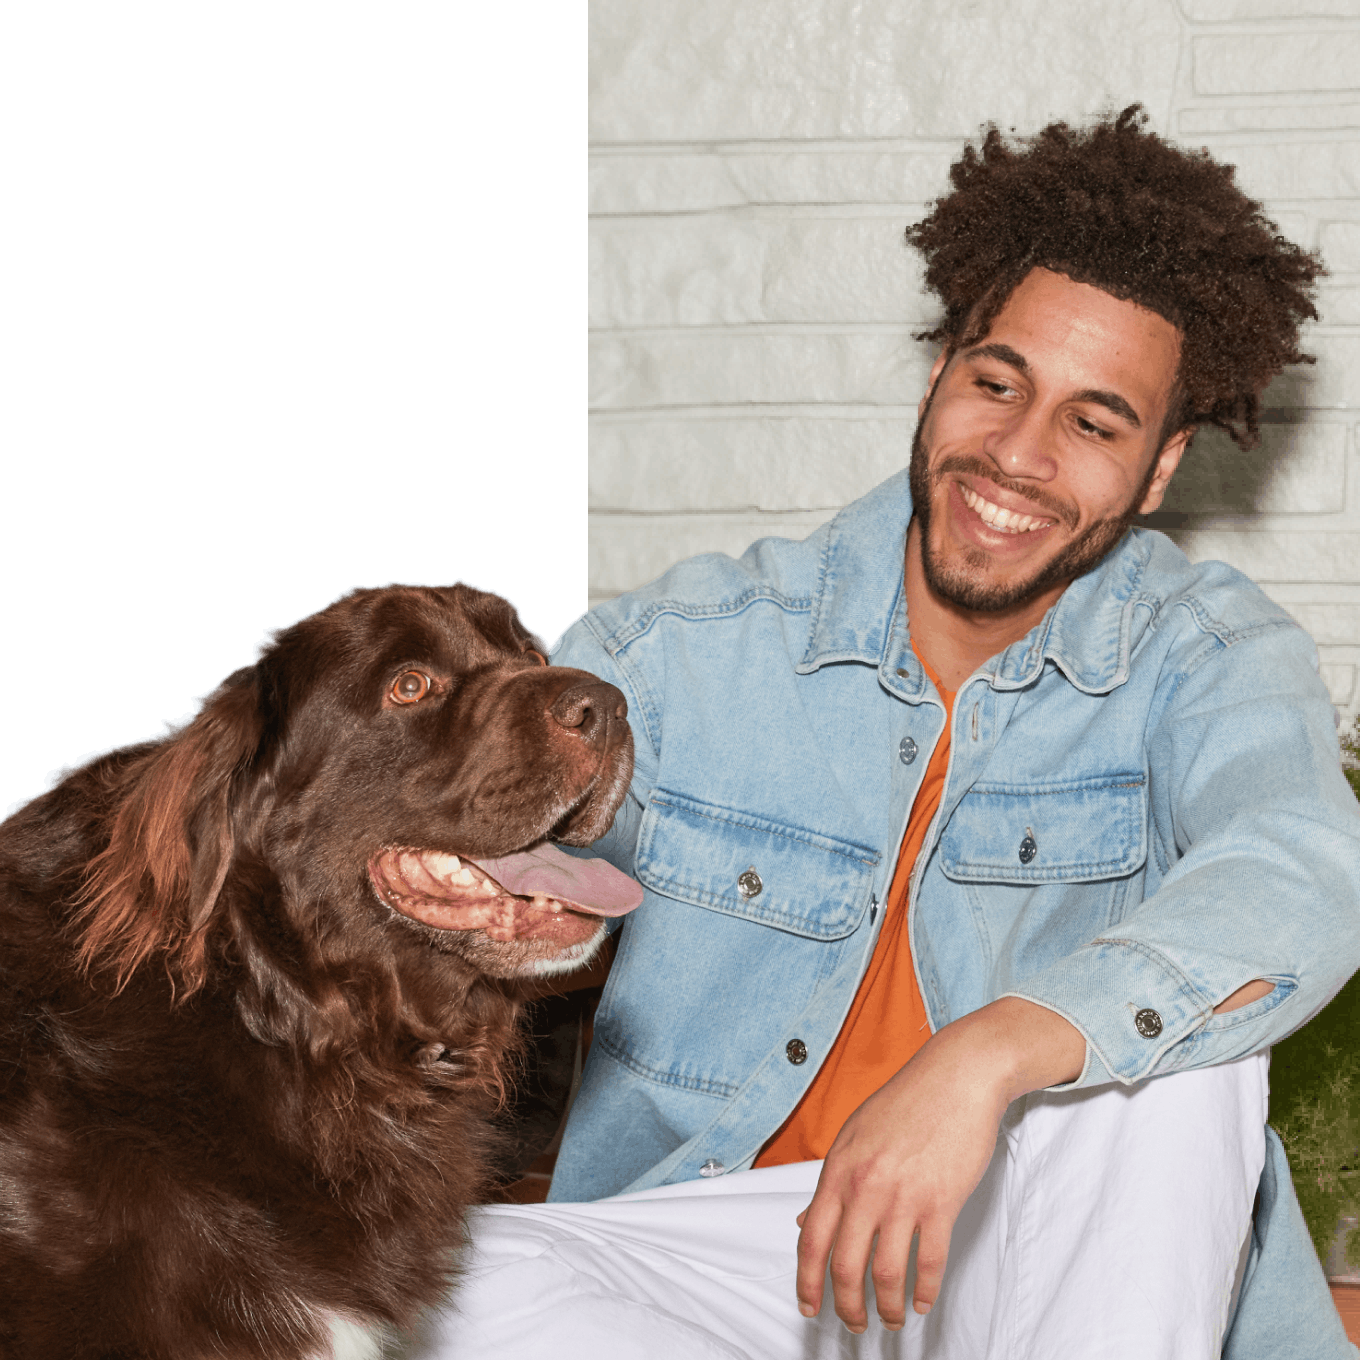 A man hanging out with with a big brown dog